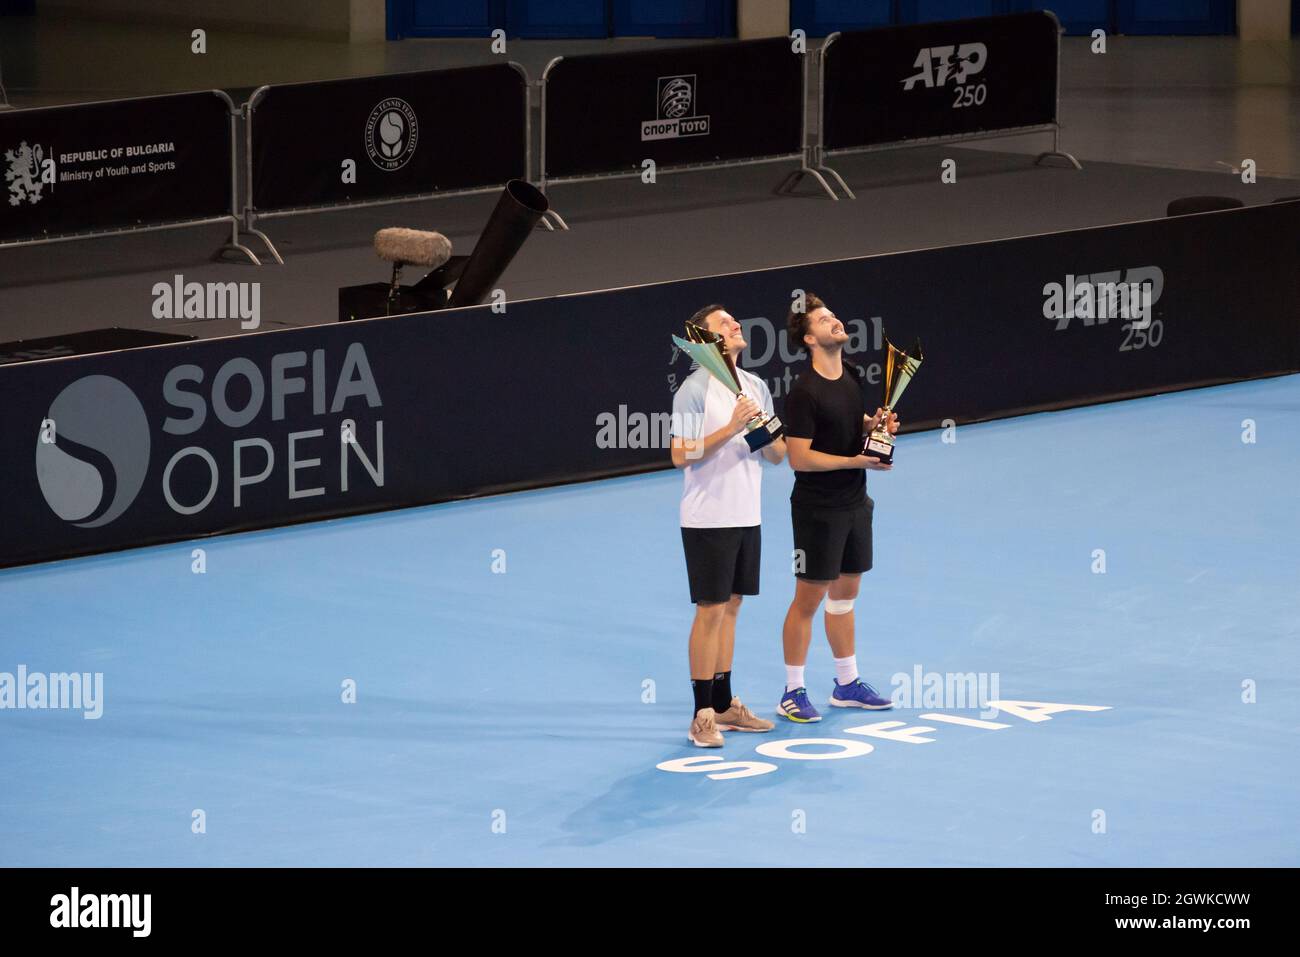 Sofia, Bulgaria. 03 October 2021. Jonny O'Mara and Ken Skupski of Great Britain celebrates after winning 6:3 6:4 the title against Oliver Marach and Philipp Oswald of Austria at the final of the Sofia Open 2021 ATP 250 indoor tennis tournament on hard courts. Credit: Ognyan Yosifov/Alamy Live News Stock Photo